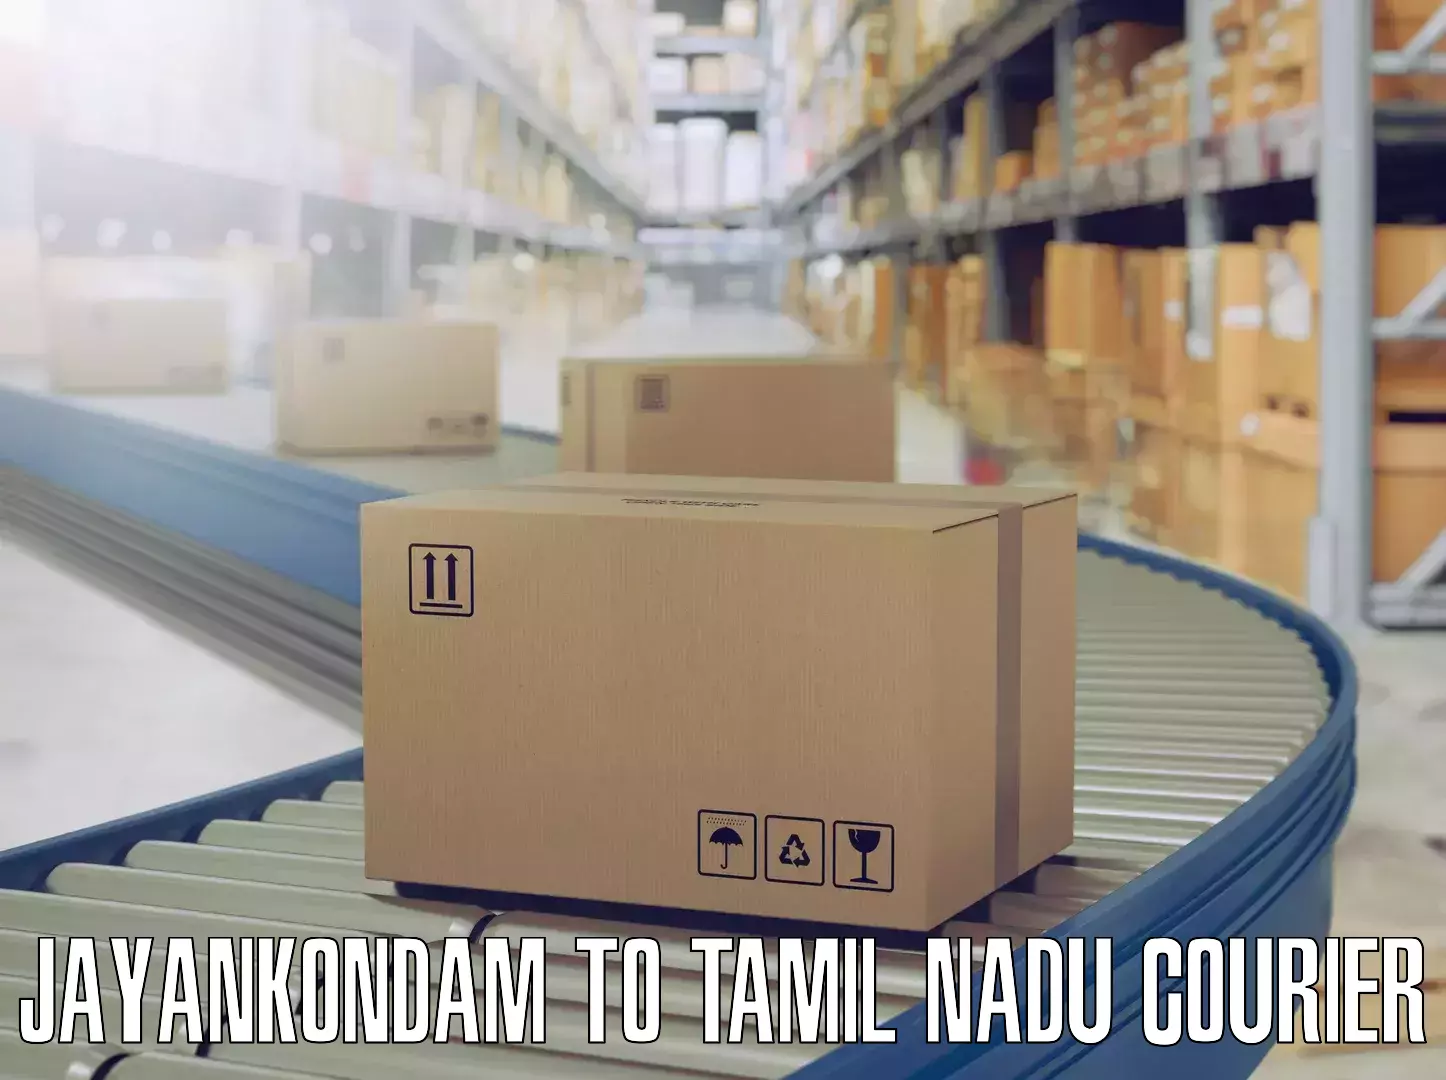 Trusted moving company in Jayankondam to Tamil Nadu